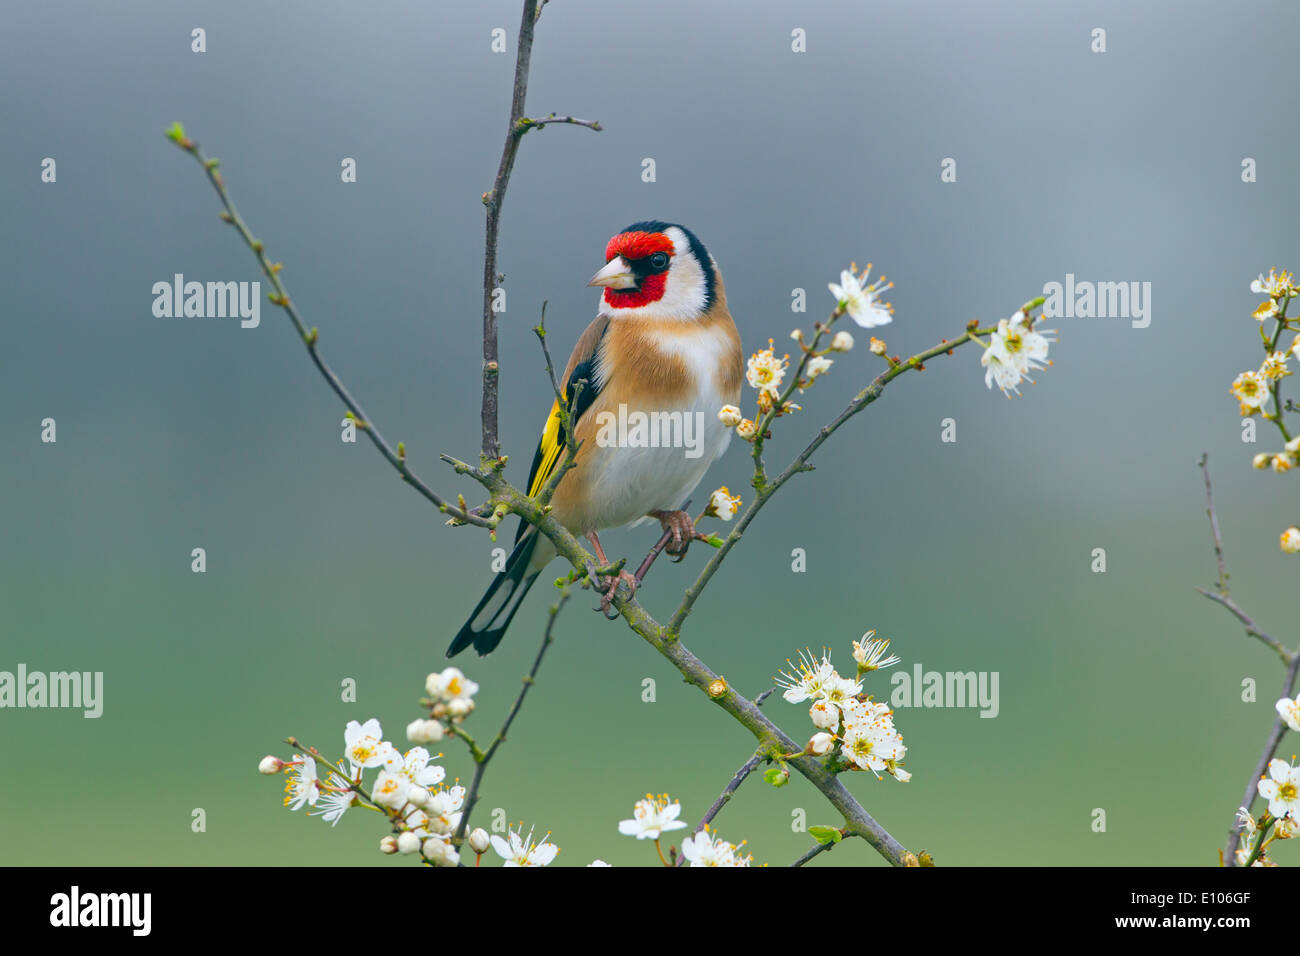 Goldfinch Carduelis carduelis on Spring blackthorn Prunus spinosa, Blossom Stock Photo